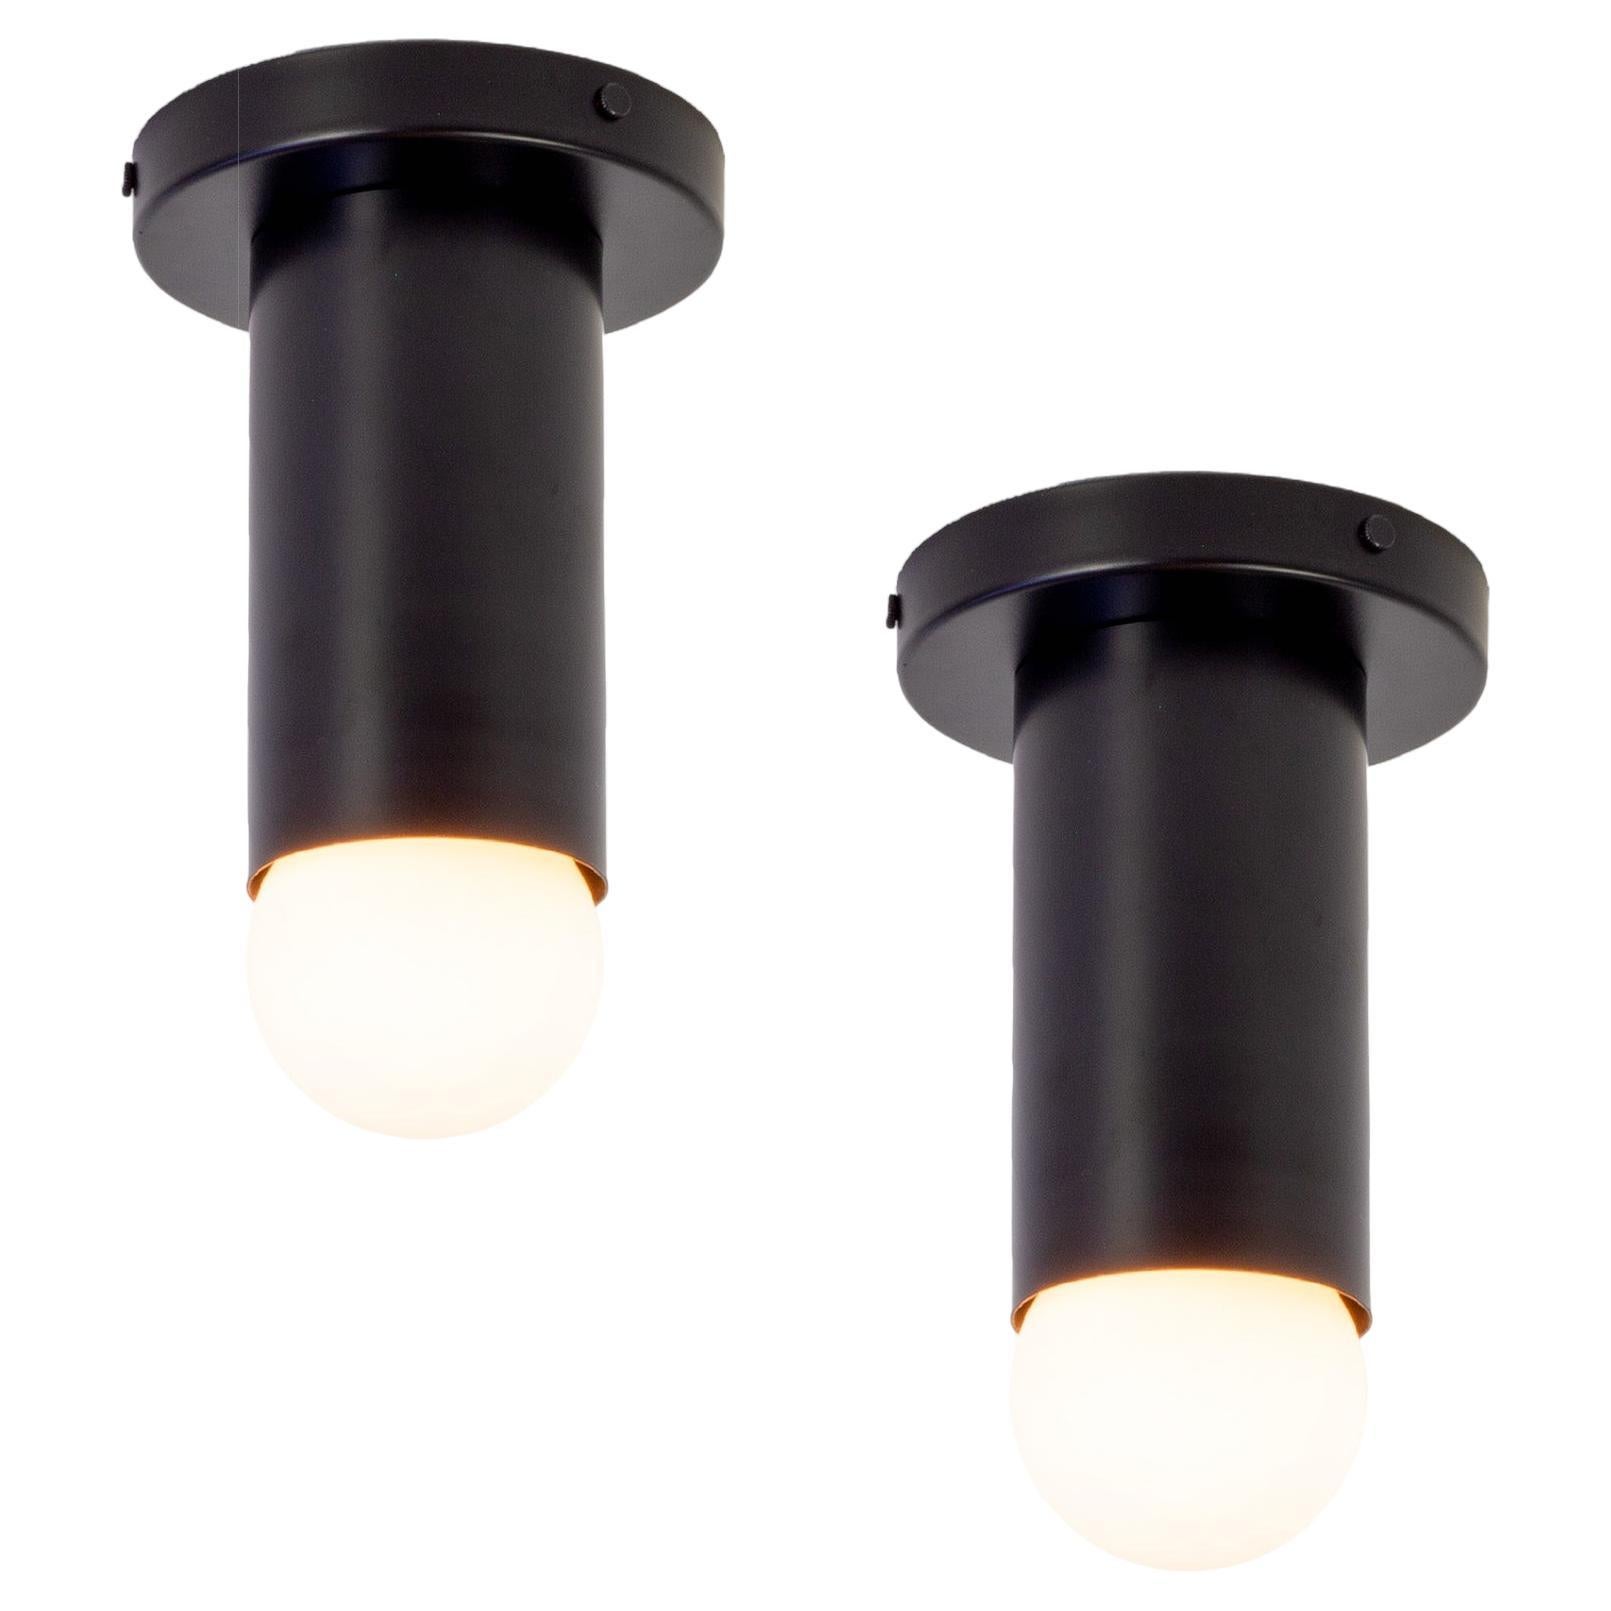 Pair of Deep Flush Mounts by Research.Lighting, Black, Made to Order For Sale